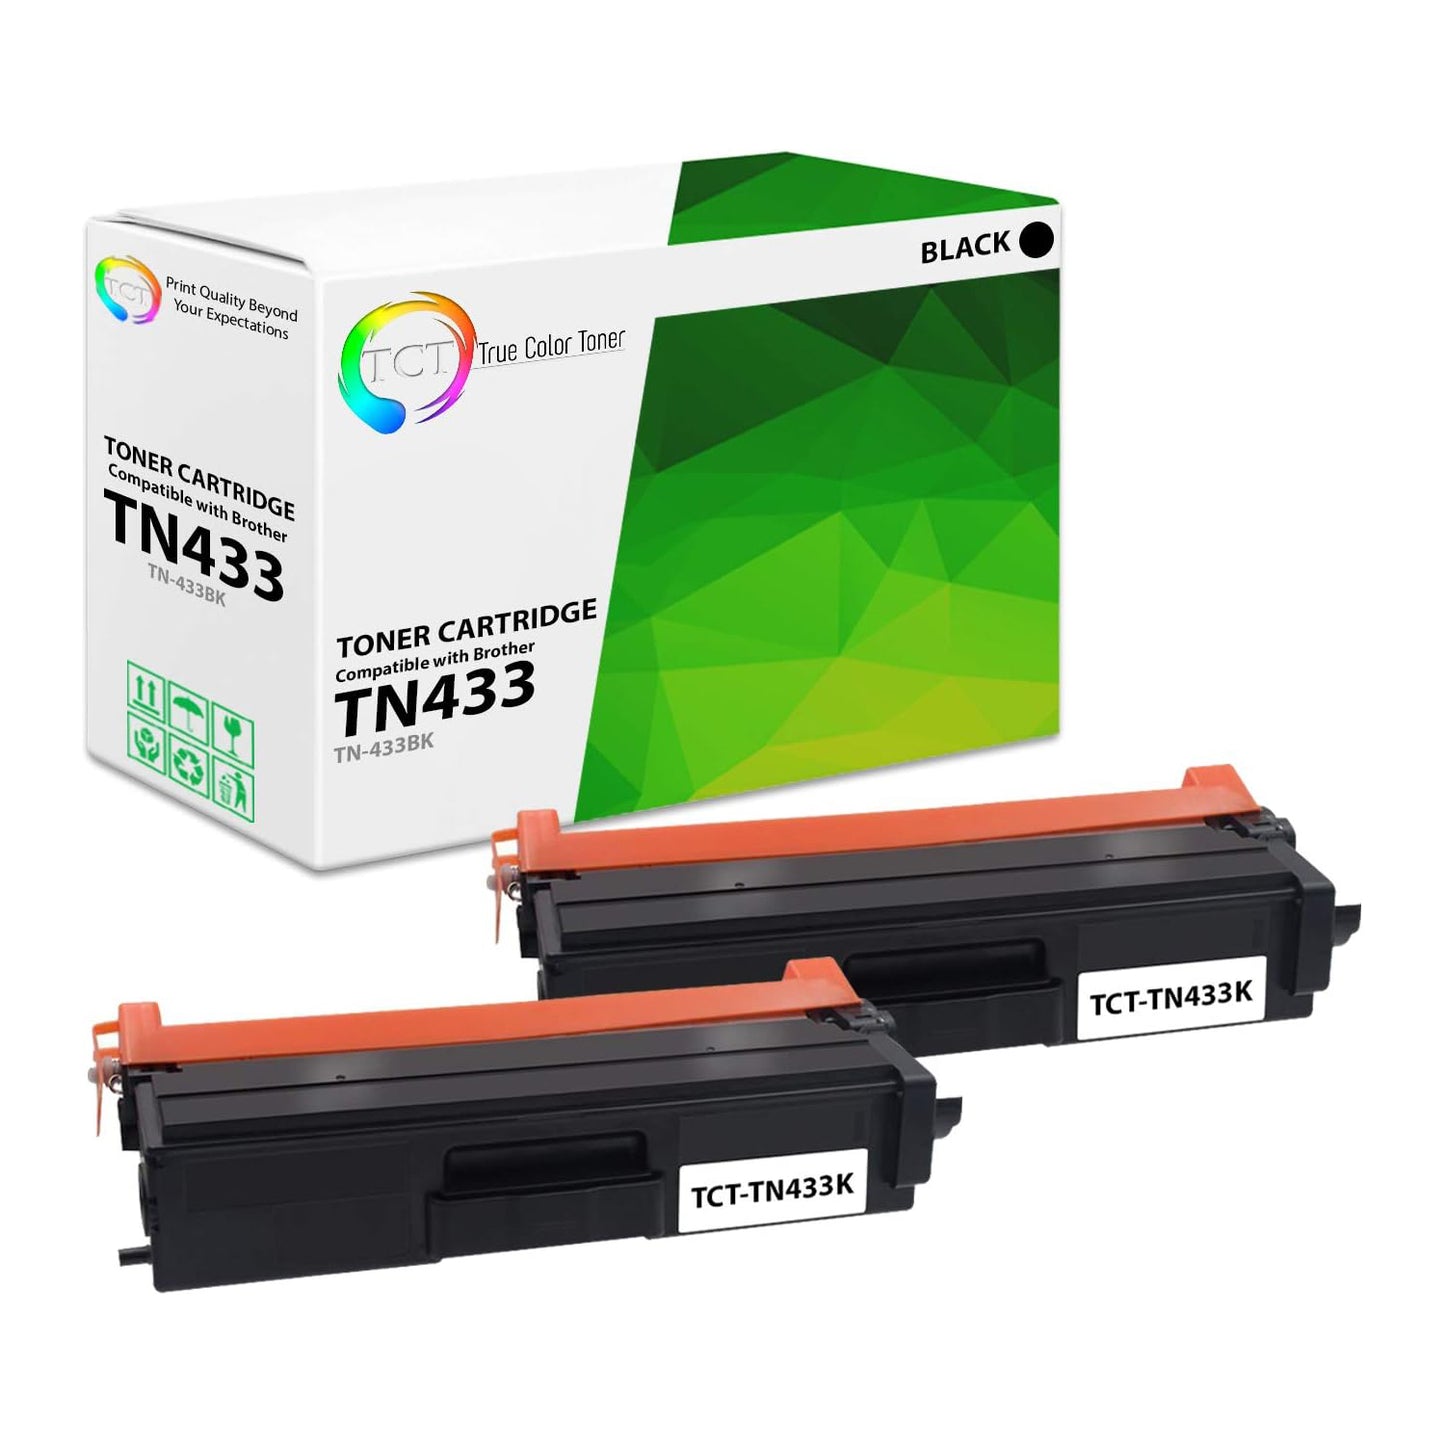 TCT Compatible  High Yield Toner Cartridge Replacement for the Brother TN433 Series - 2 Pack Black